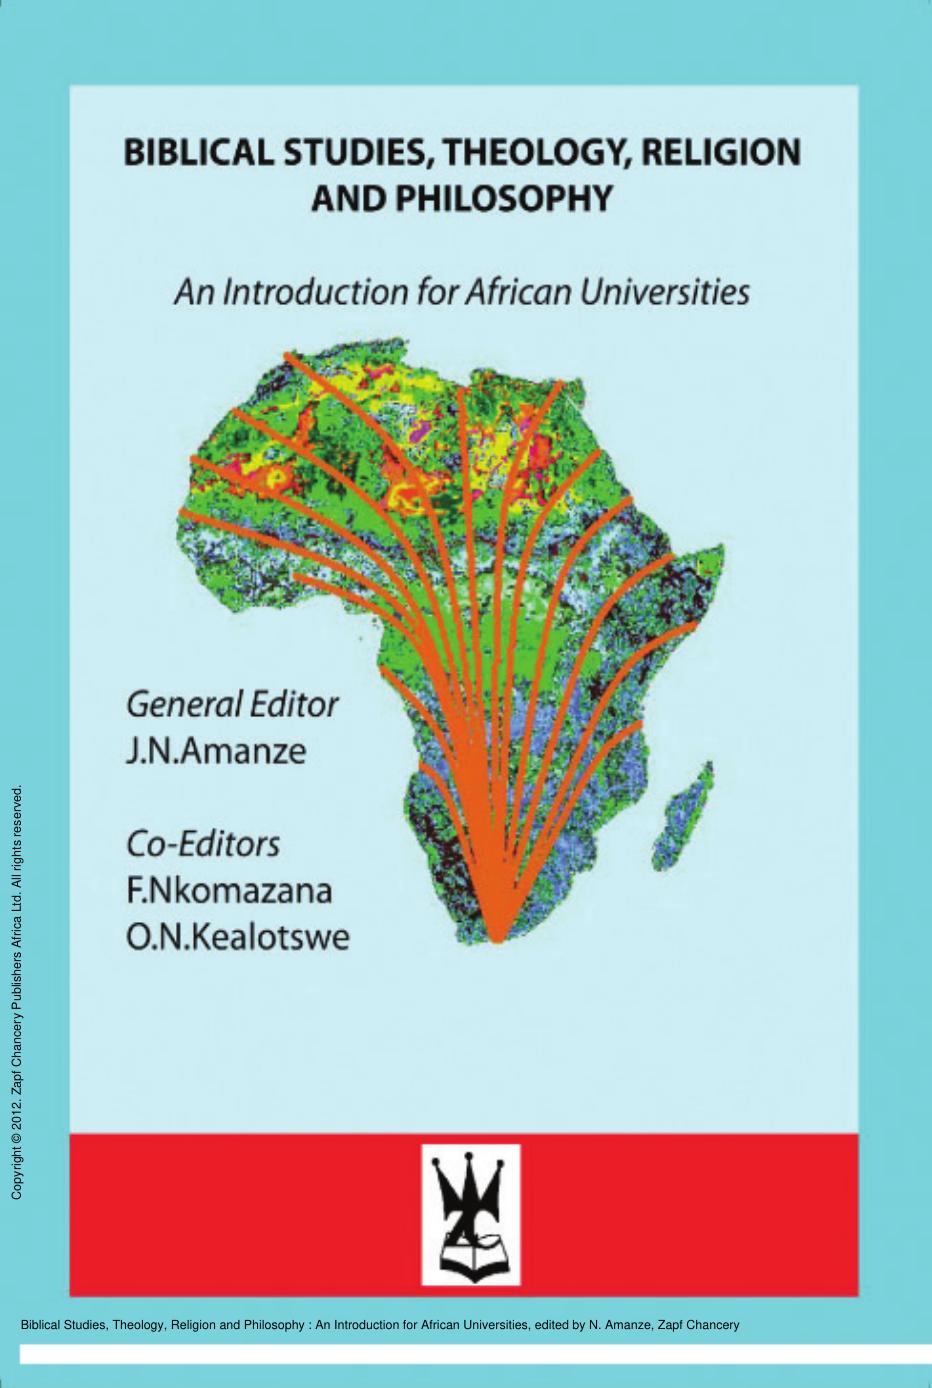 Biblical Studies, Theology, Religion and Philosophy : An Introduction for African Universities by N. Amanze